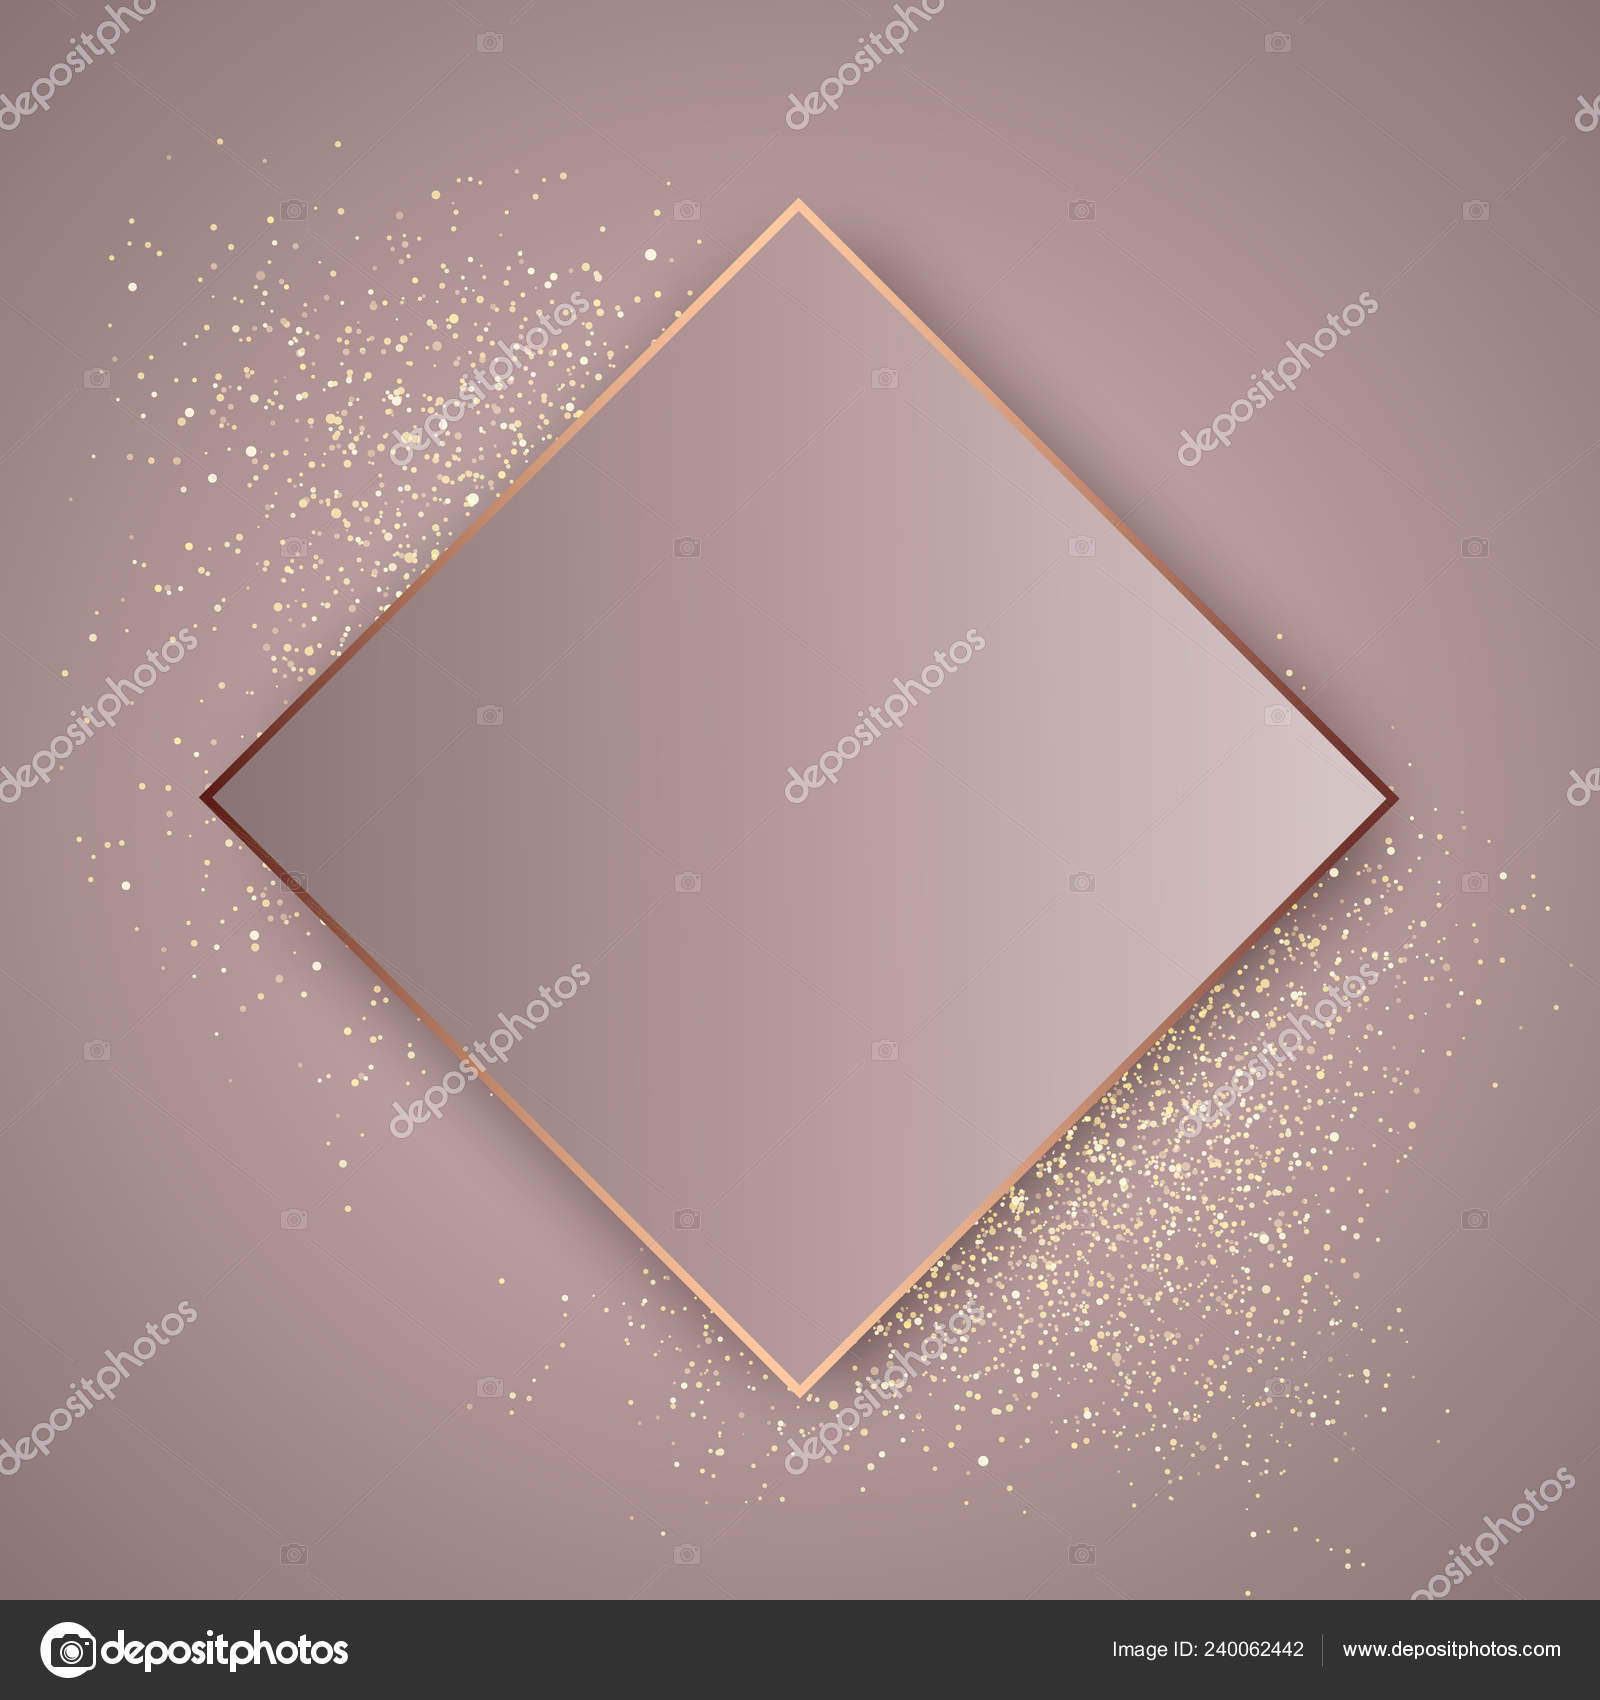 Rose gold background Vector Art Stock Images | Depositphotos